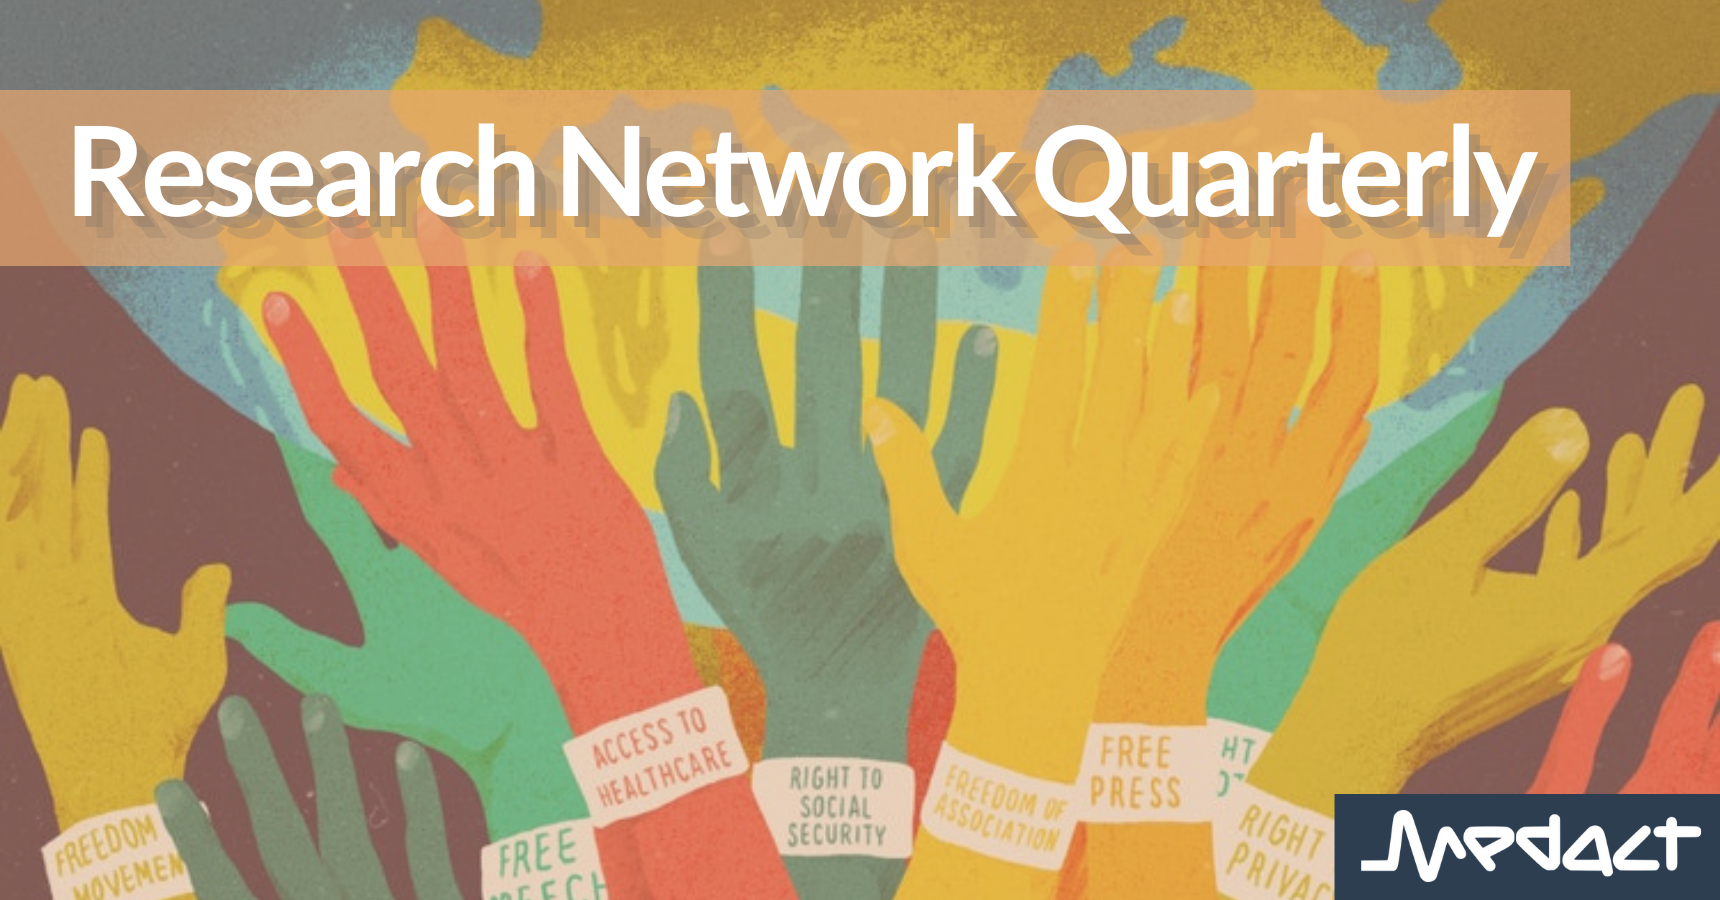 Medact Research Network Quarterly